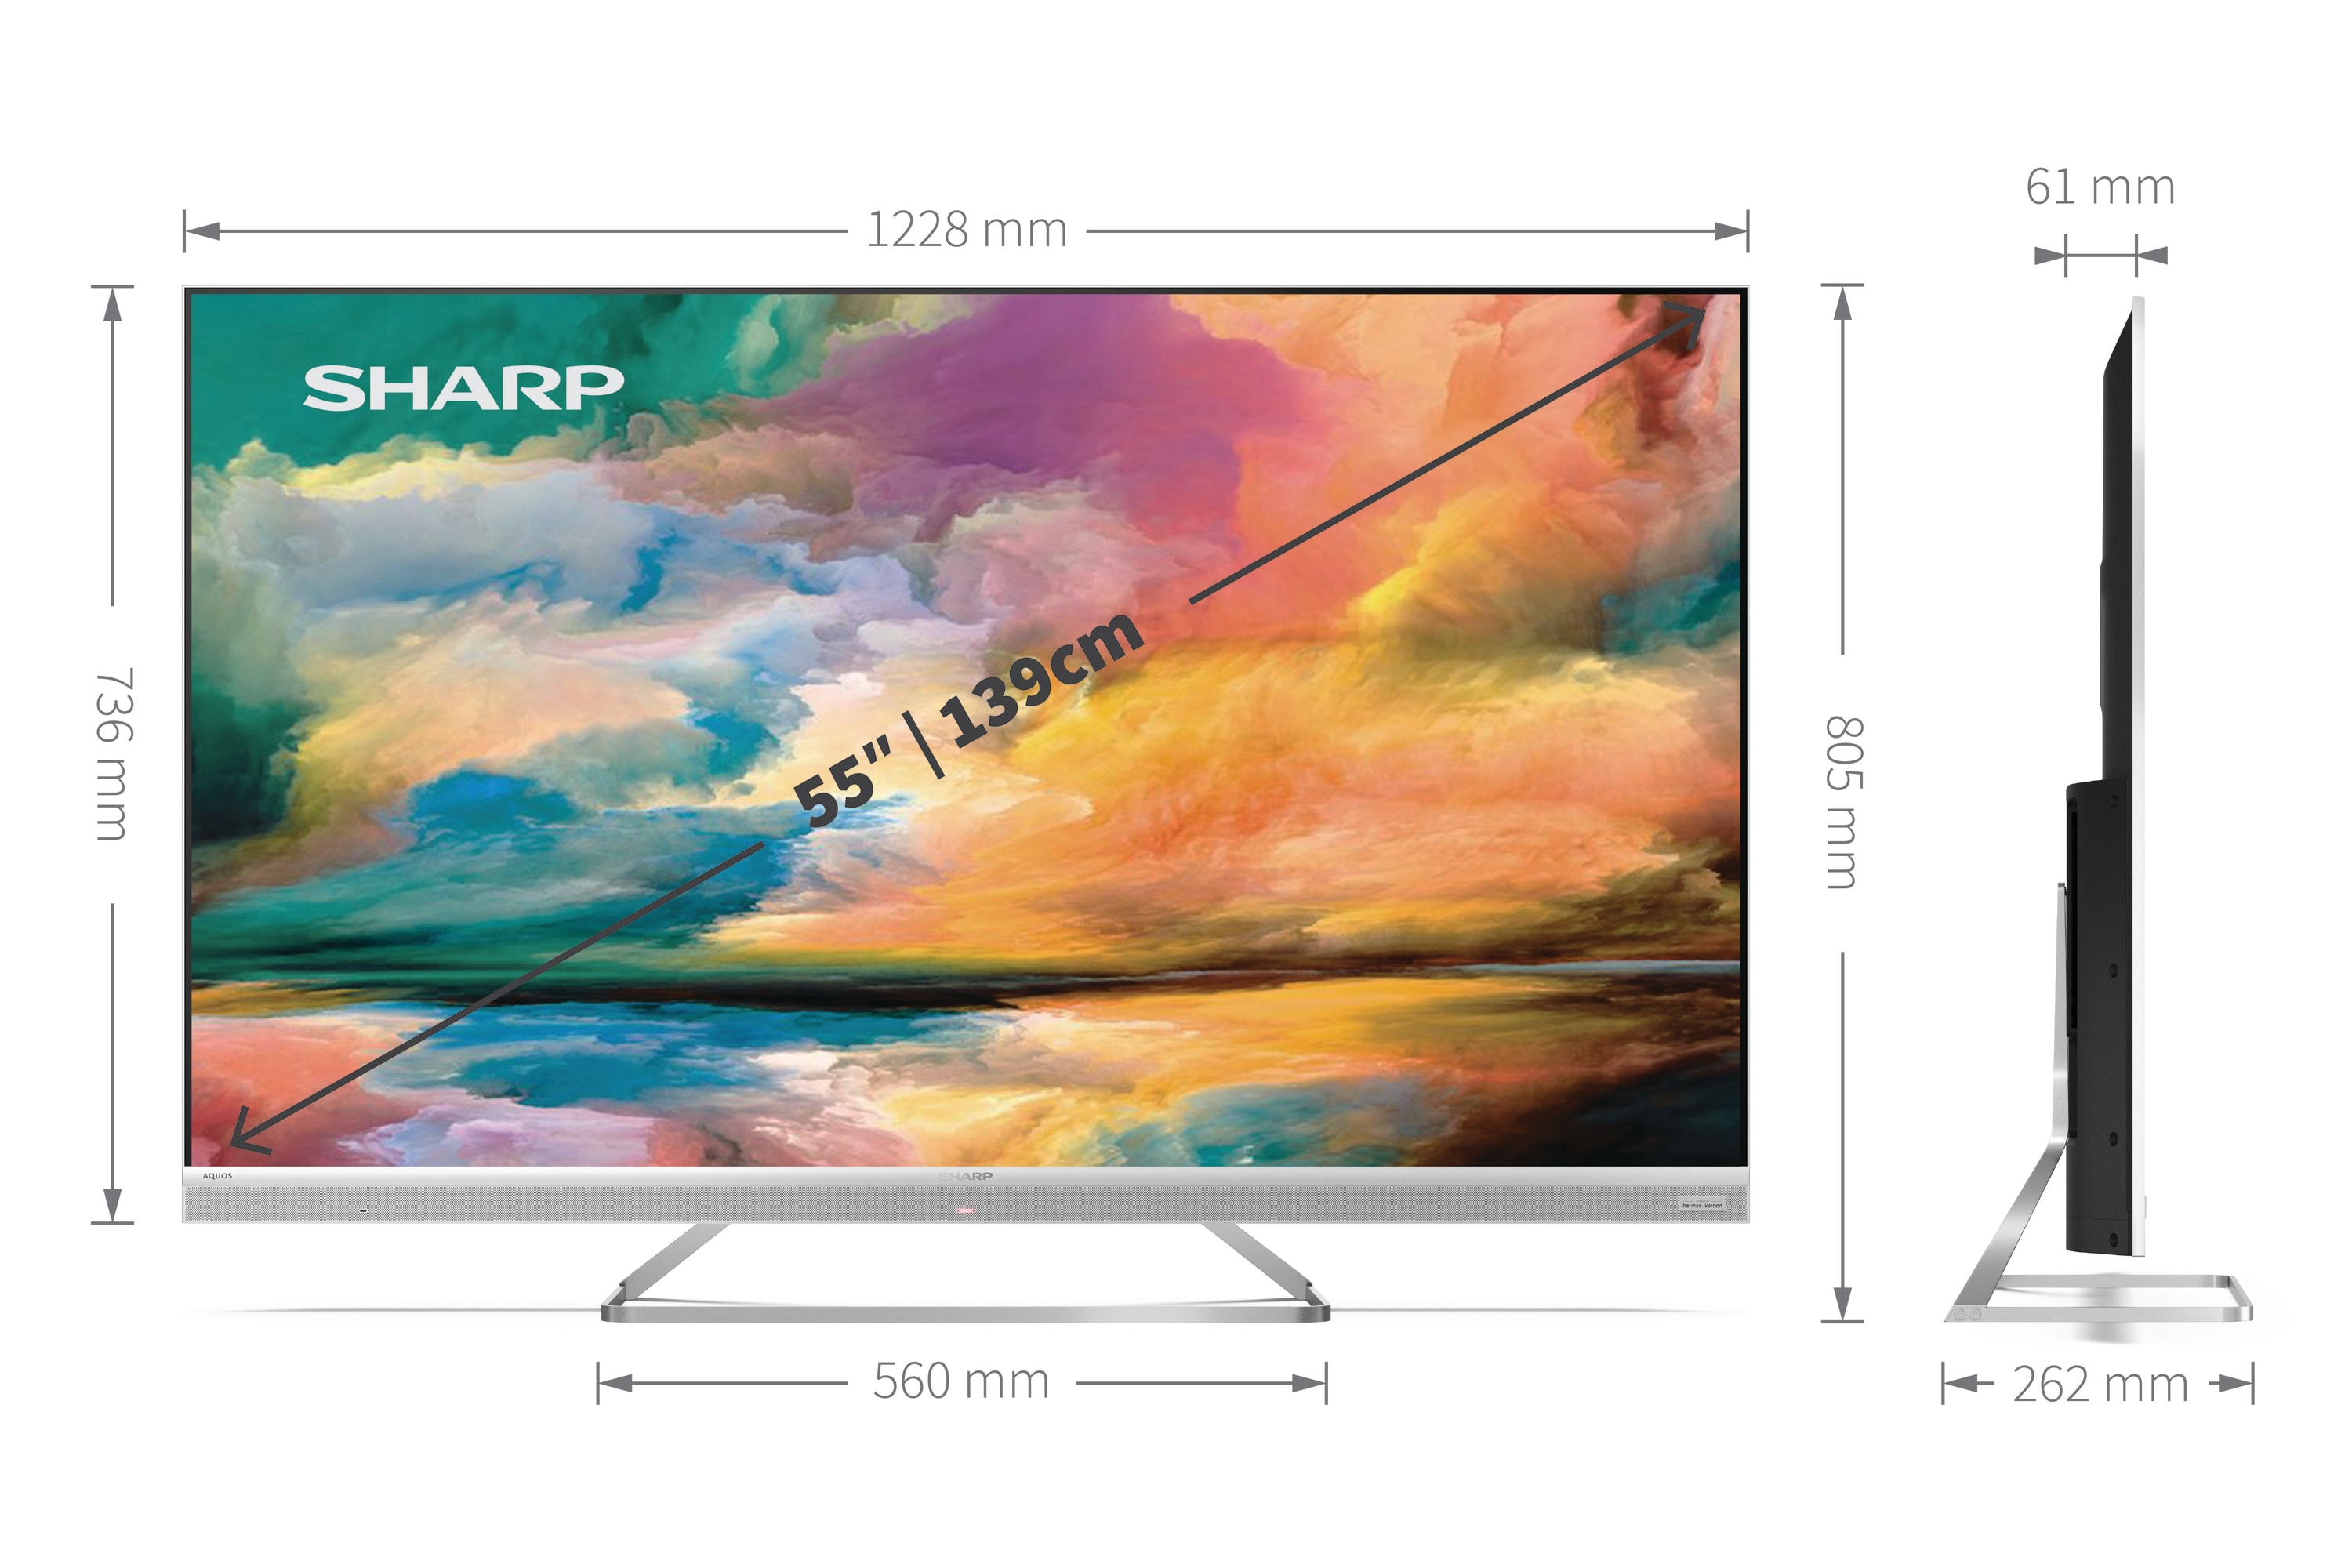 Android-TV, 4K UHD - 55 ZOLL 4K ULTRA HD QUANTUM DOT SHARP ANDROID TV™